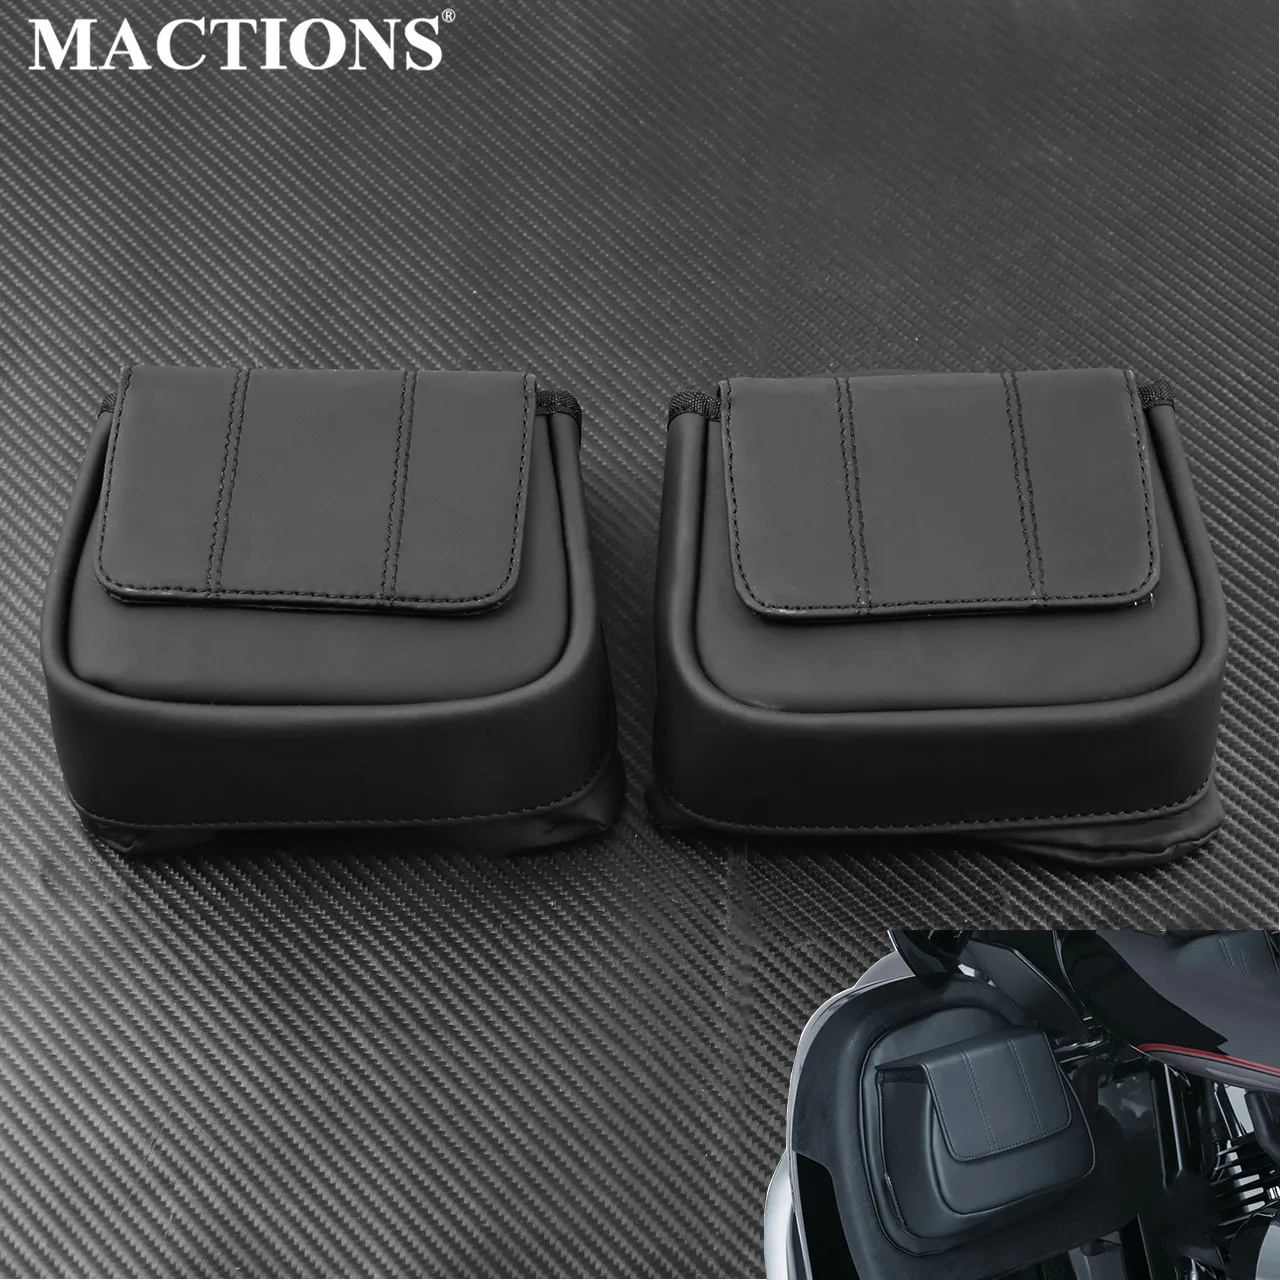 Motorcycle Lower Vented Leg Fairing Glove Box Tool Bag For Harley Touring Street Glide Road Glide Electra Glide 2014-2017 2018